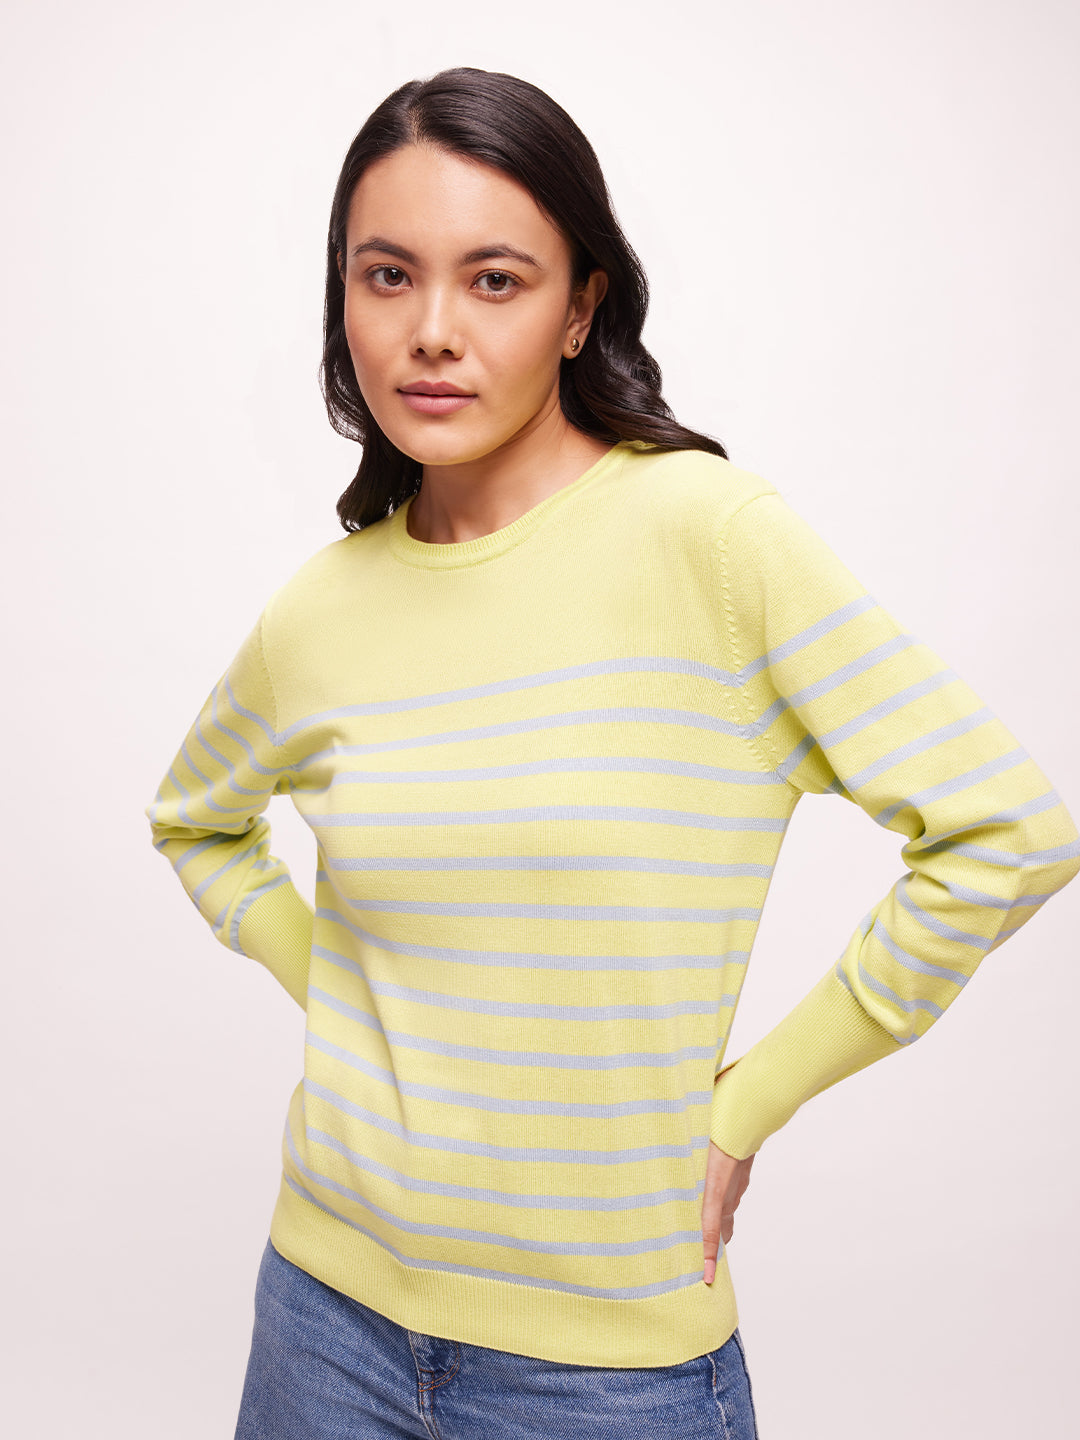 Bombay High Women's Premium Cotton Full Sleeve Striped Knit Pullover